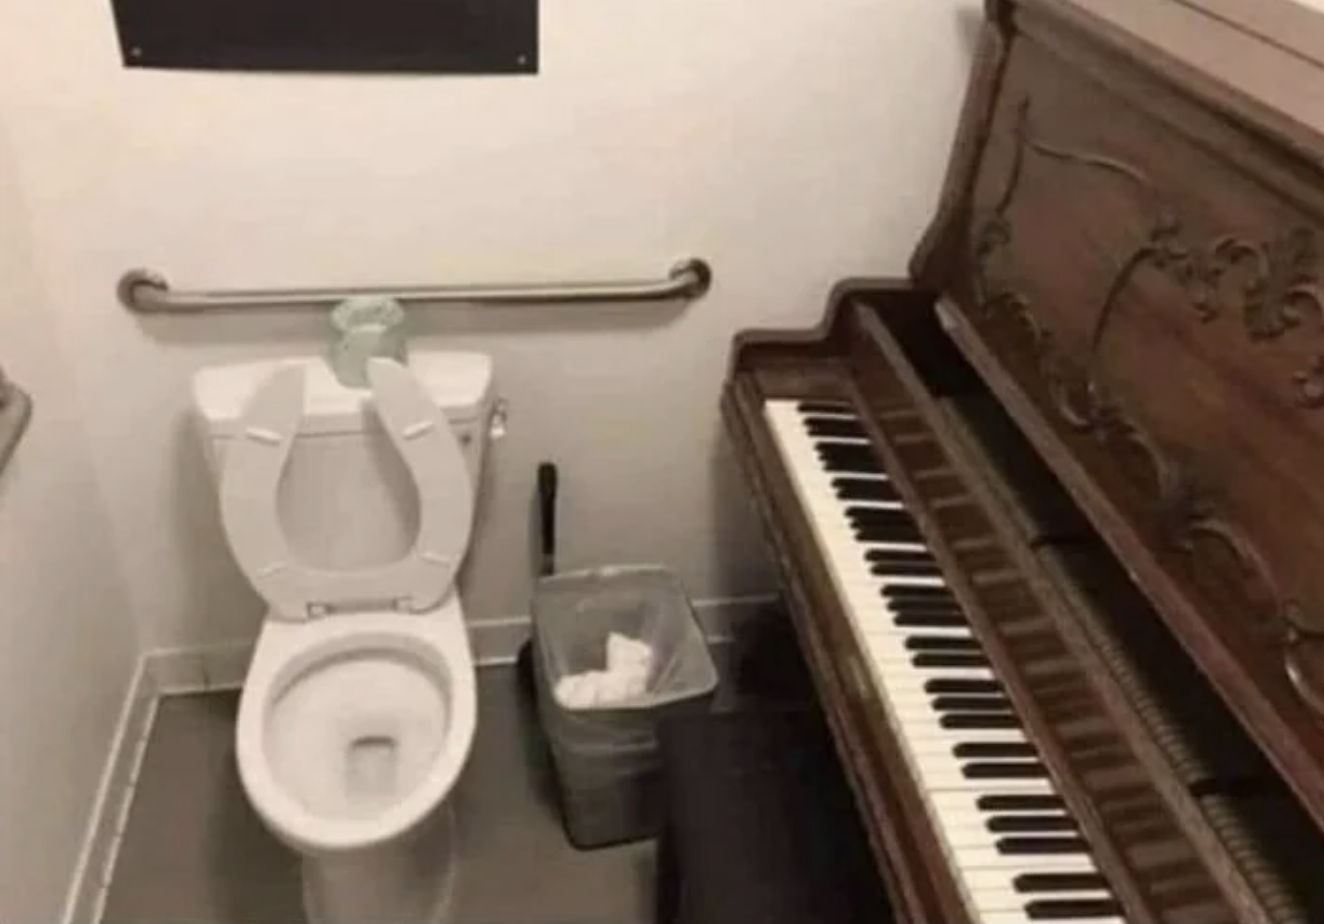 Bathroom with a toilet next to an upright piano, suggesting a quirky and humorous combination in a small space